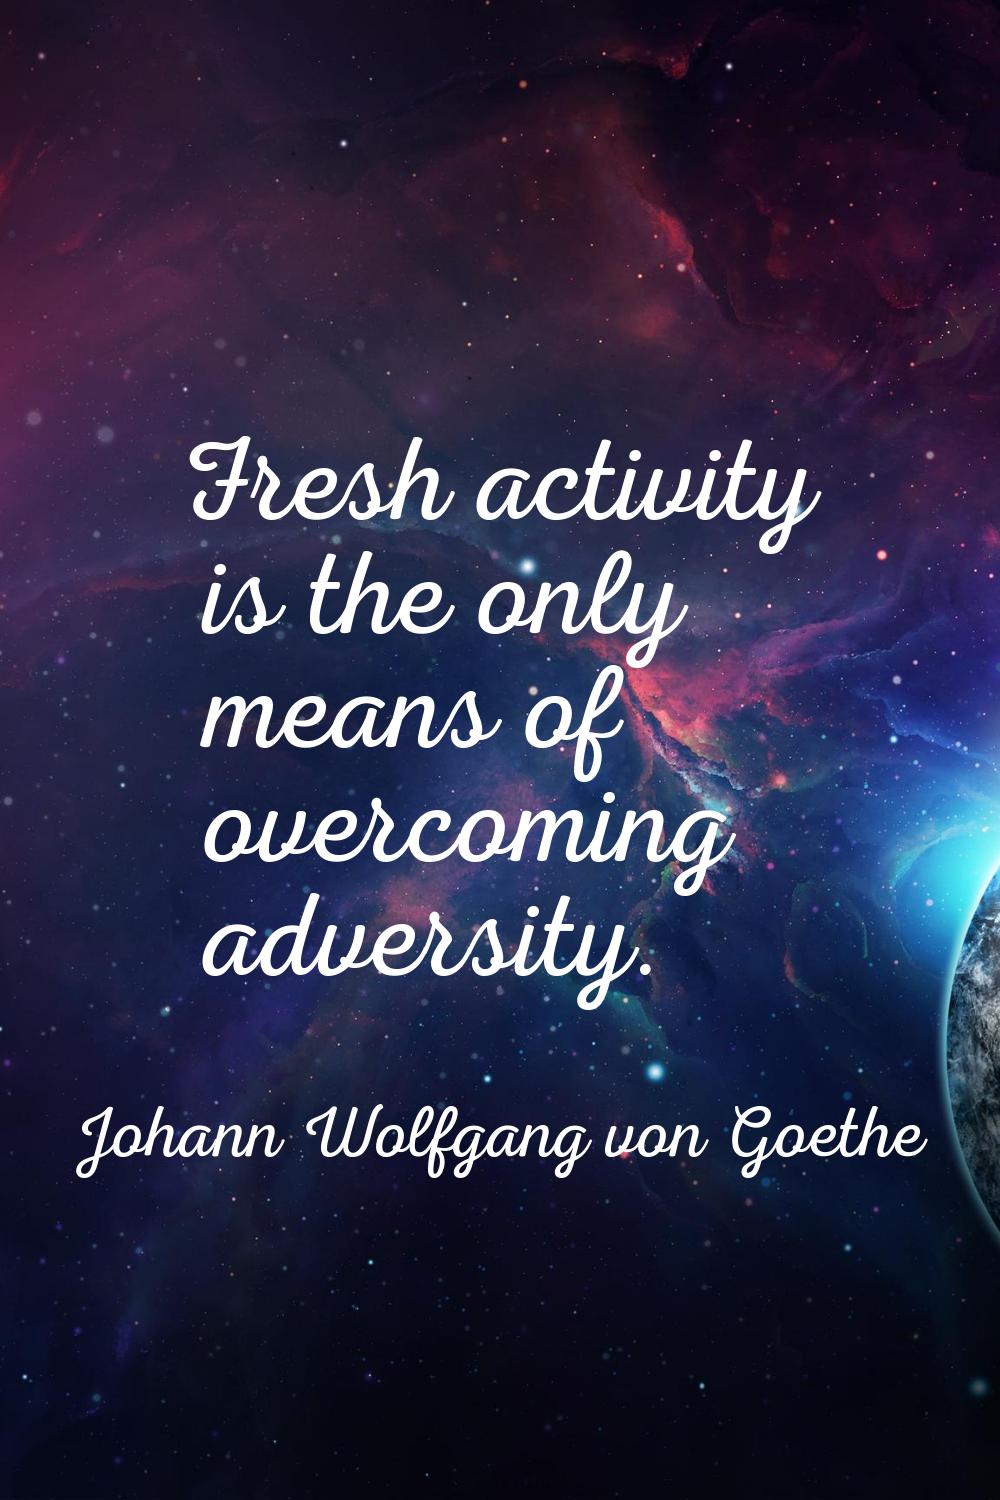 Fresh activity is the only means of overcoming adversity.